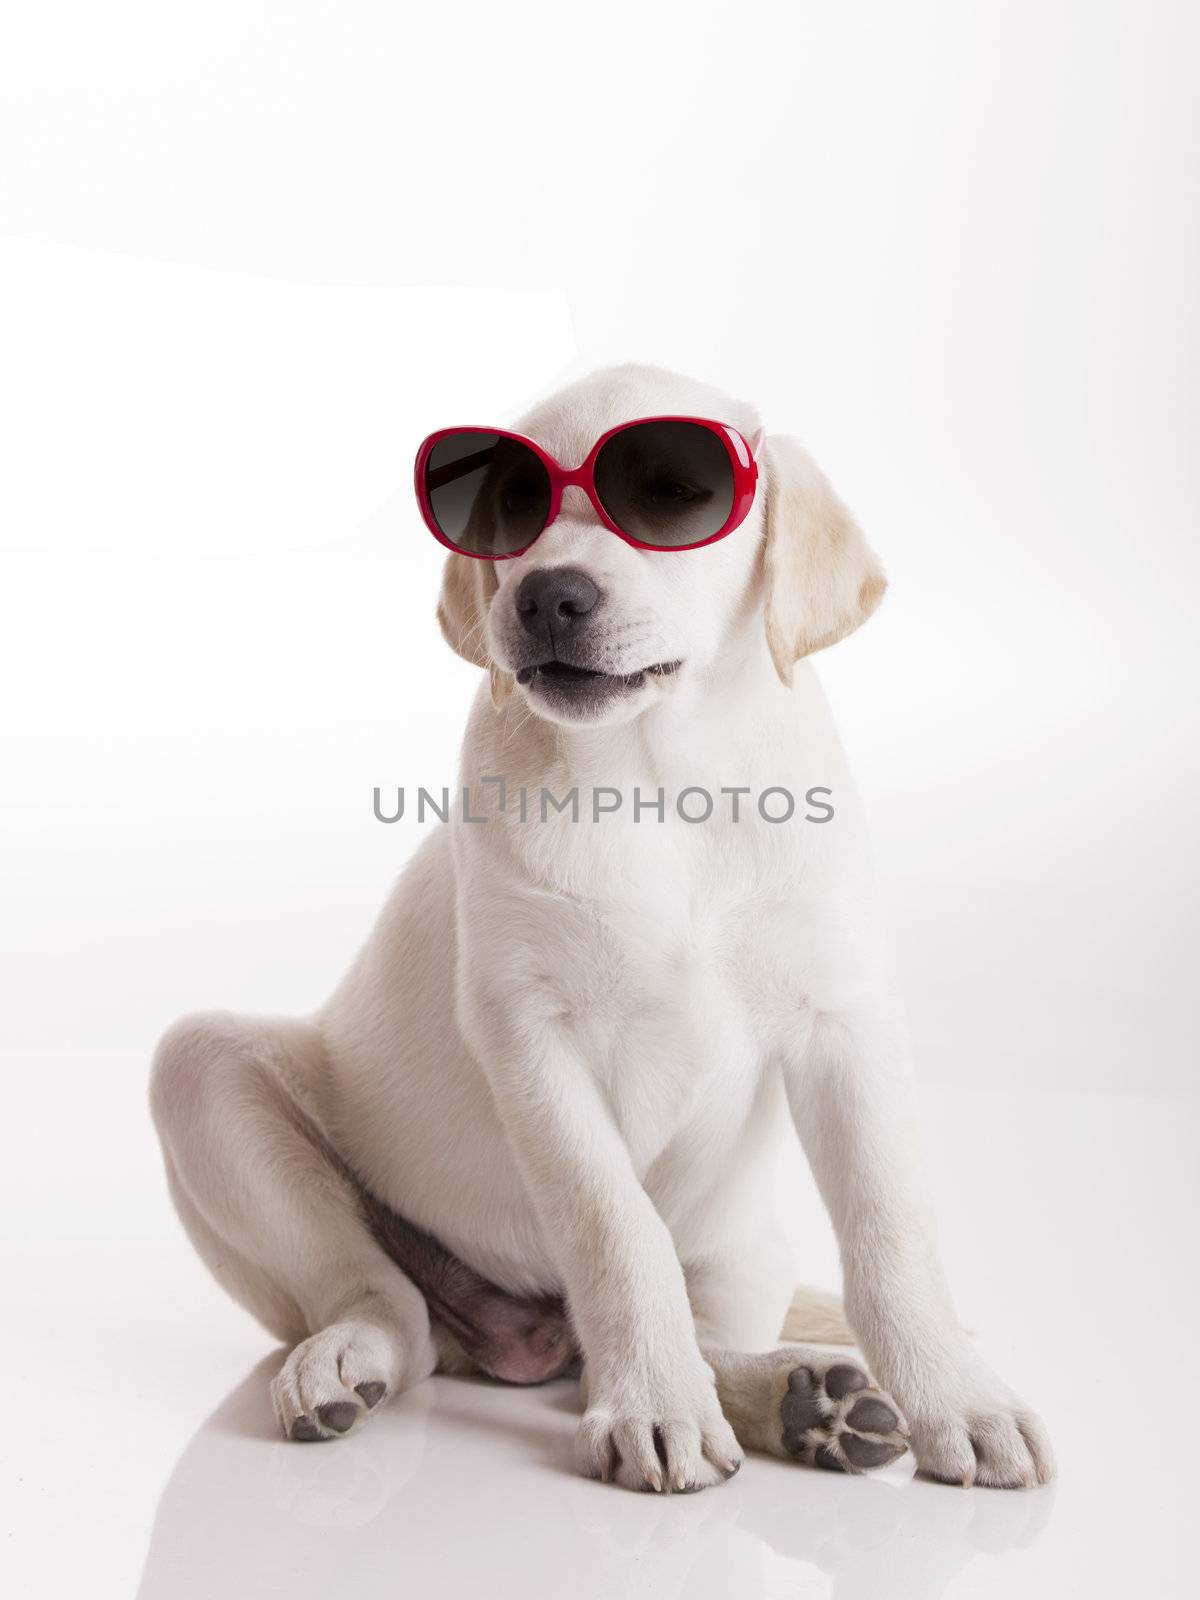 Puppy with sunglasses by Iko